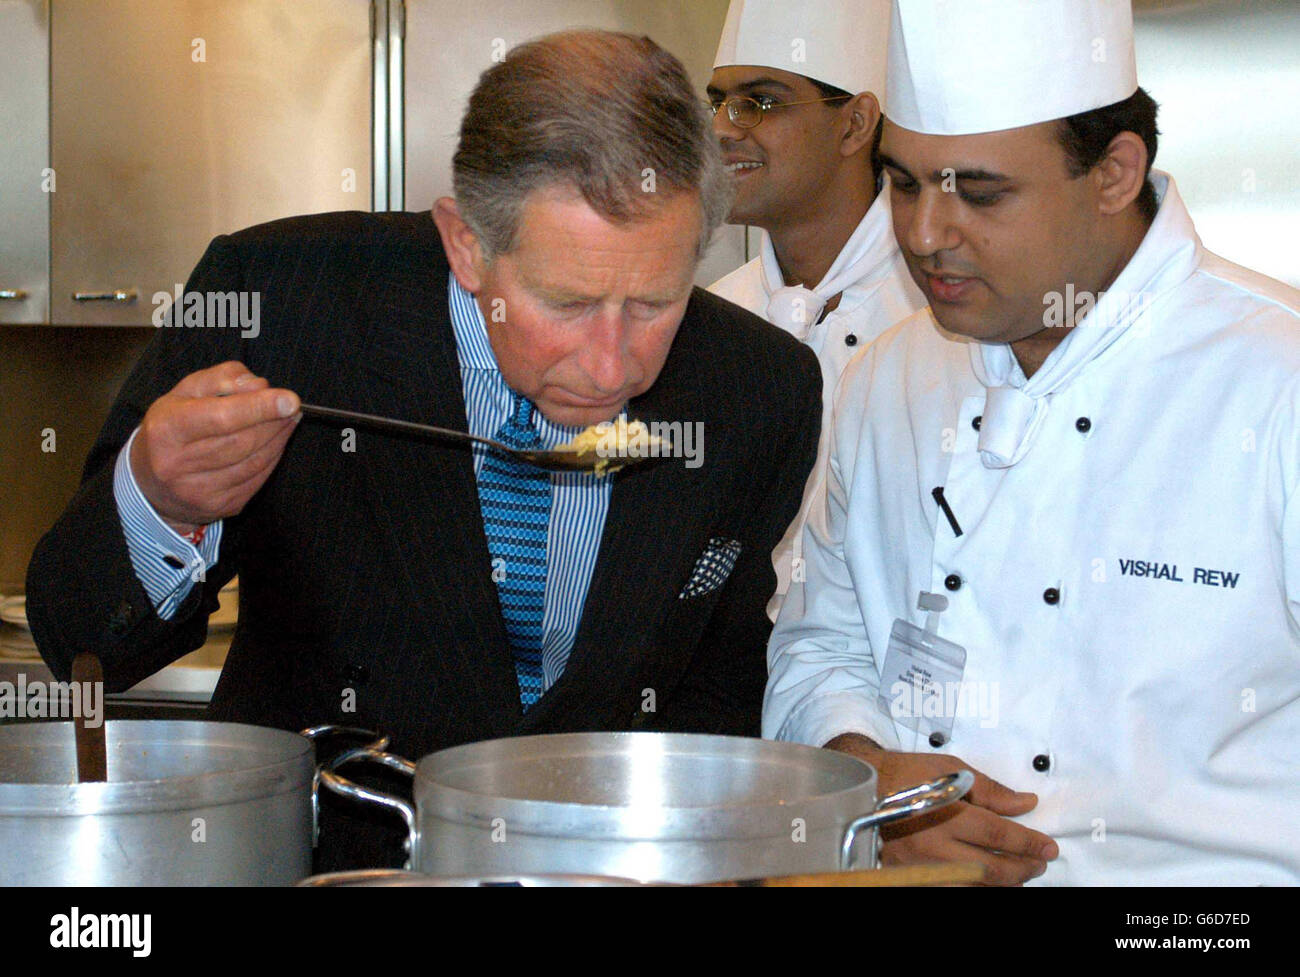 The Prince of Wales during his visit at Noon Products in Southall. Dressed in a pin-striped suit with a stripy shirt and pale blue tie, the Prince laughed and joked with the chefs in the state of the art kitchen. * The Prince savoured the aroma from a cooking vat of Achari chicken, a hot pickled curry. Stock Photo